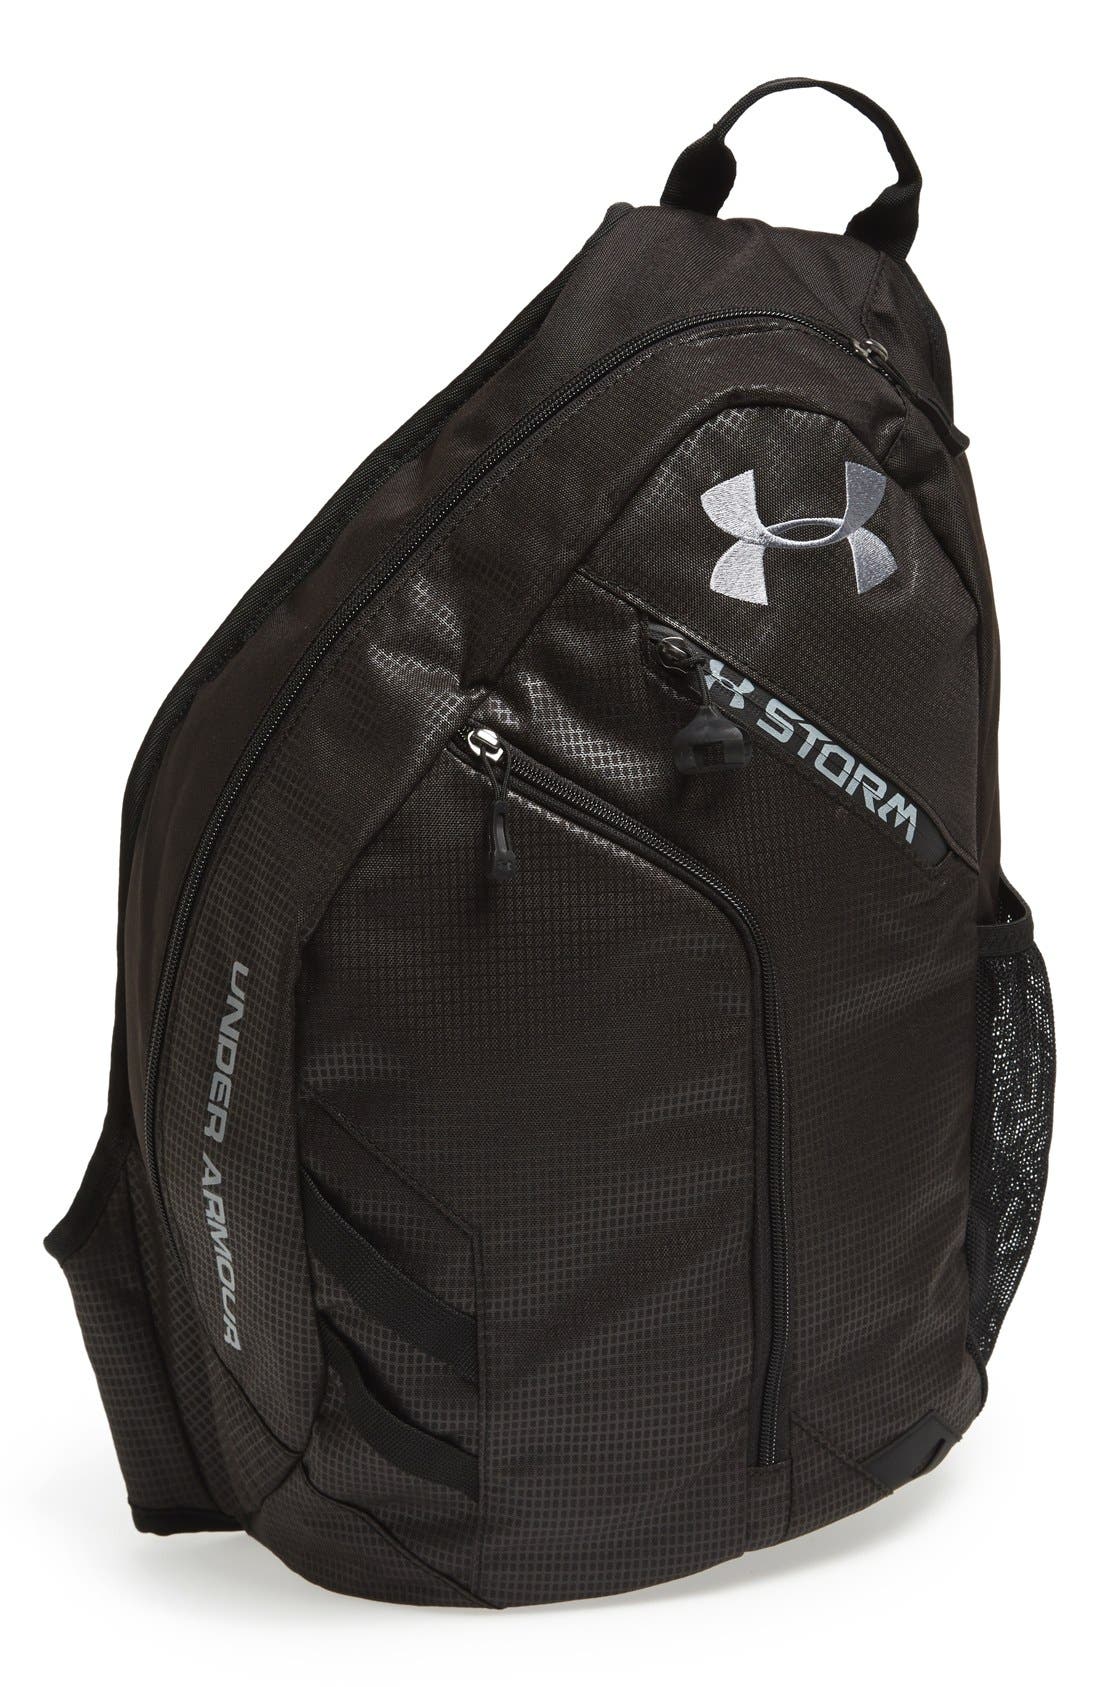 Under Armour 'Compel Storm' Sling 